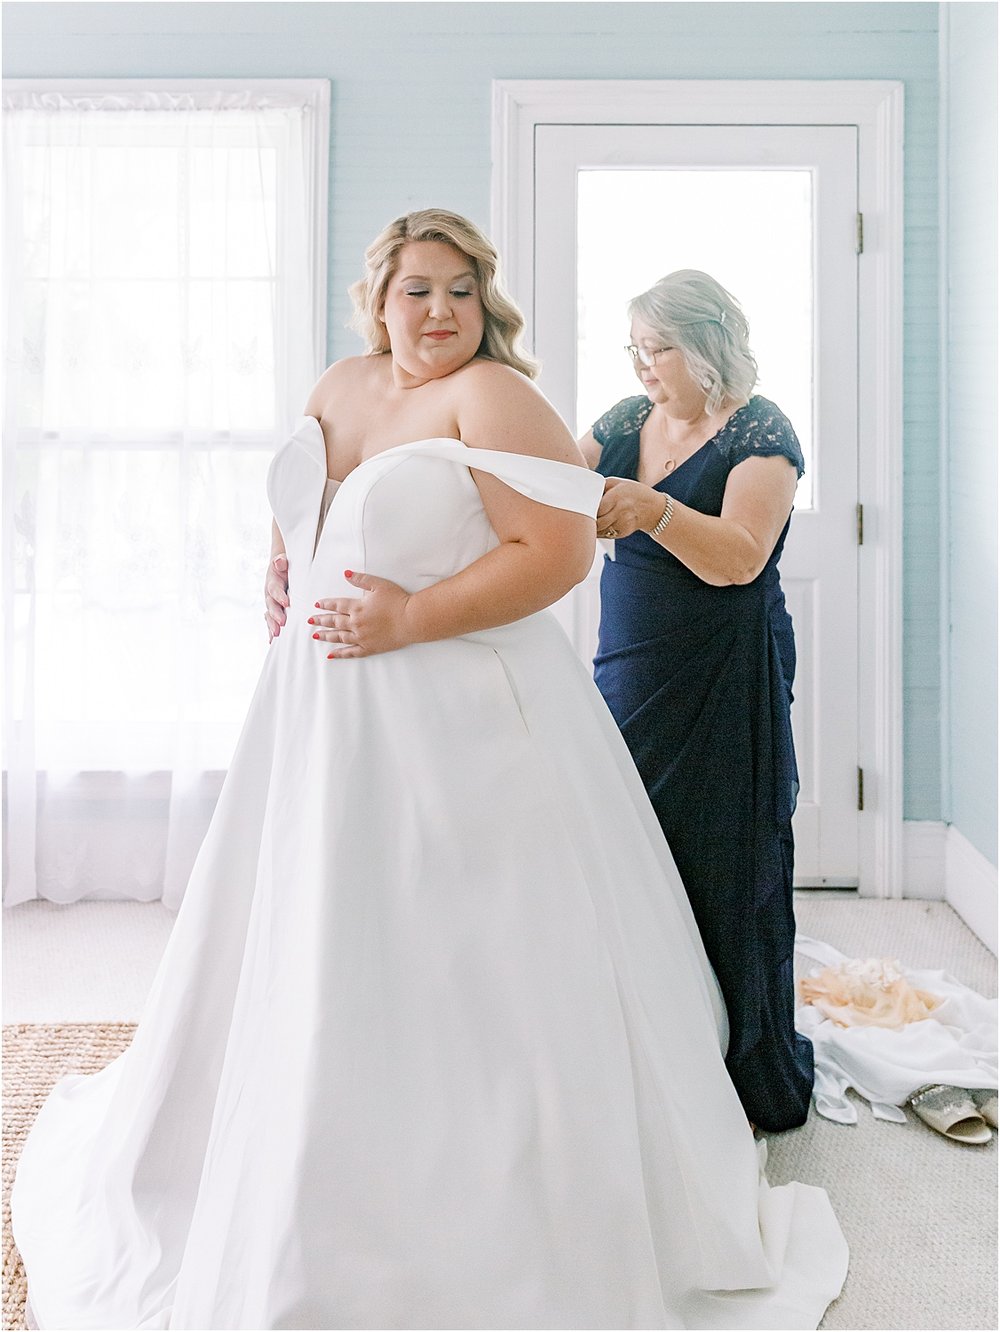 Mother and bride special moment photoshoot